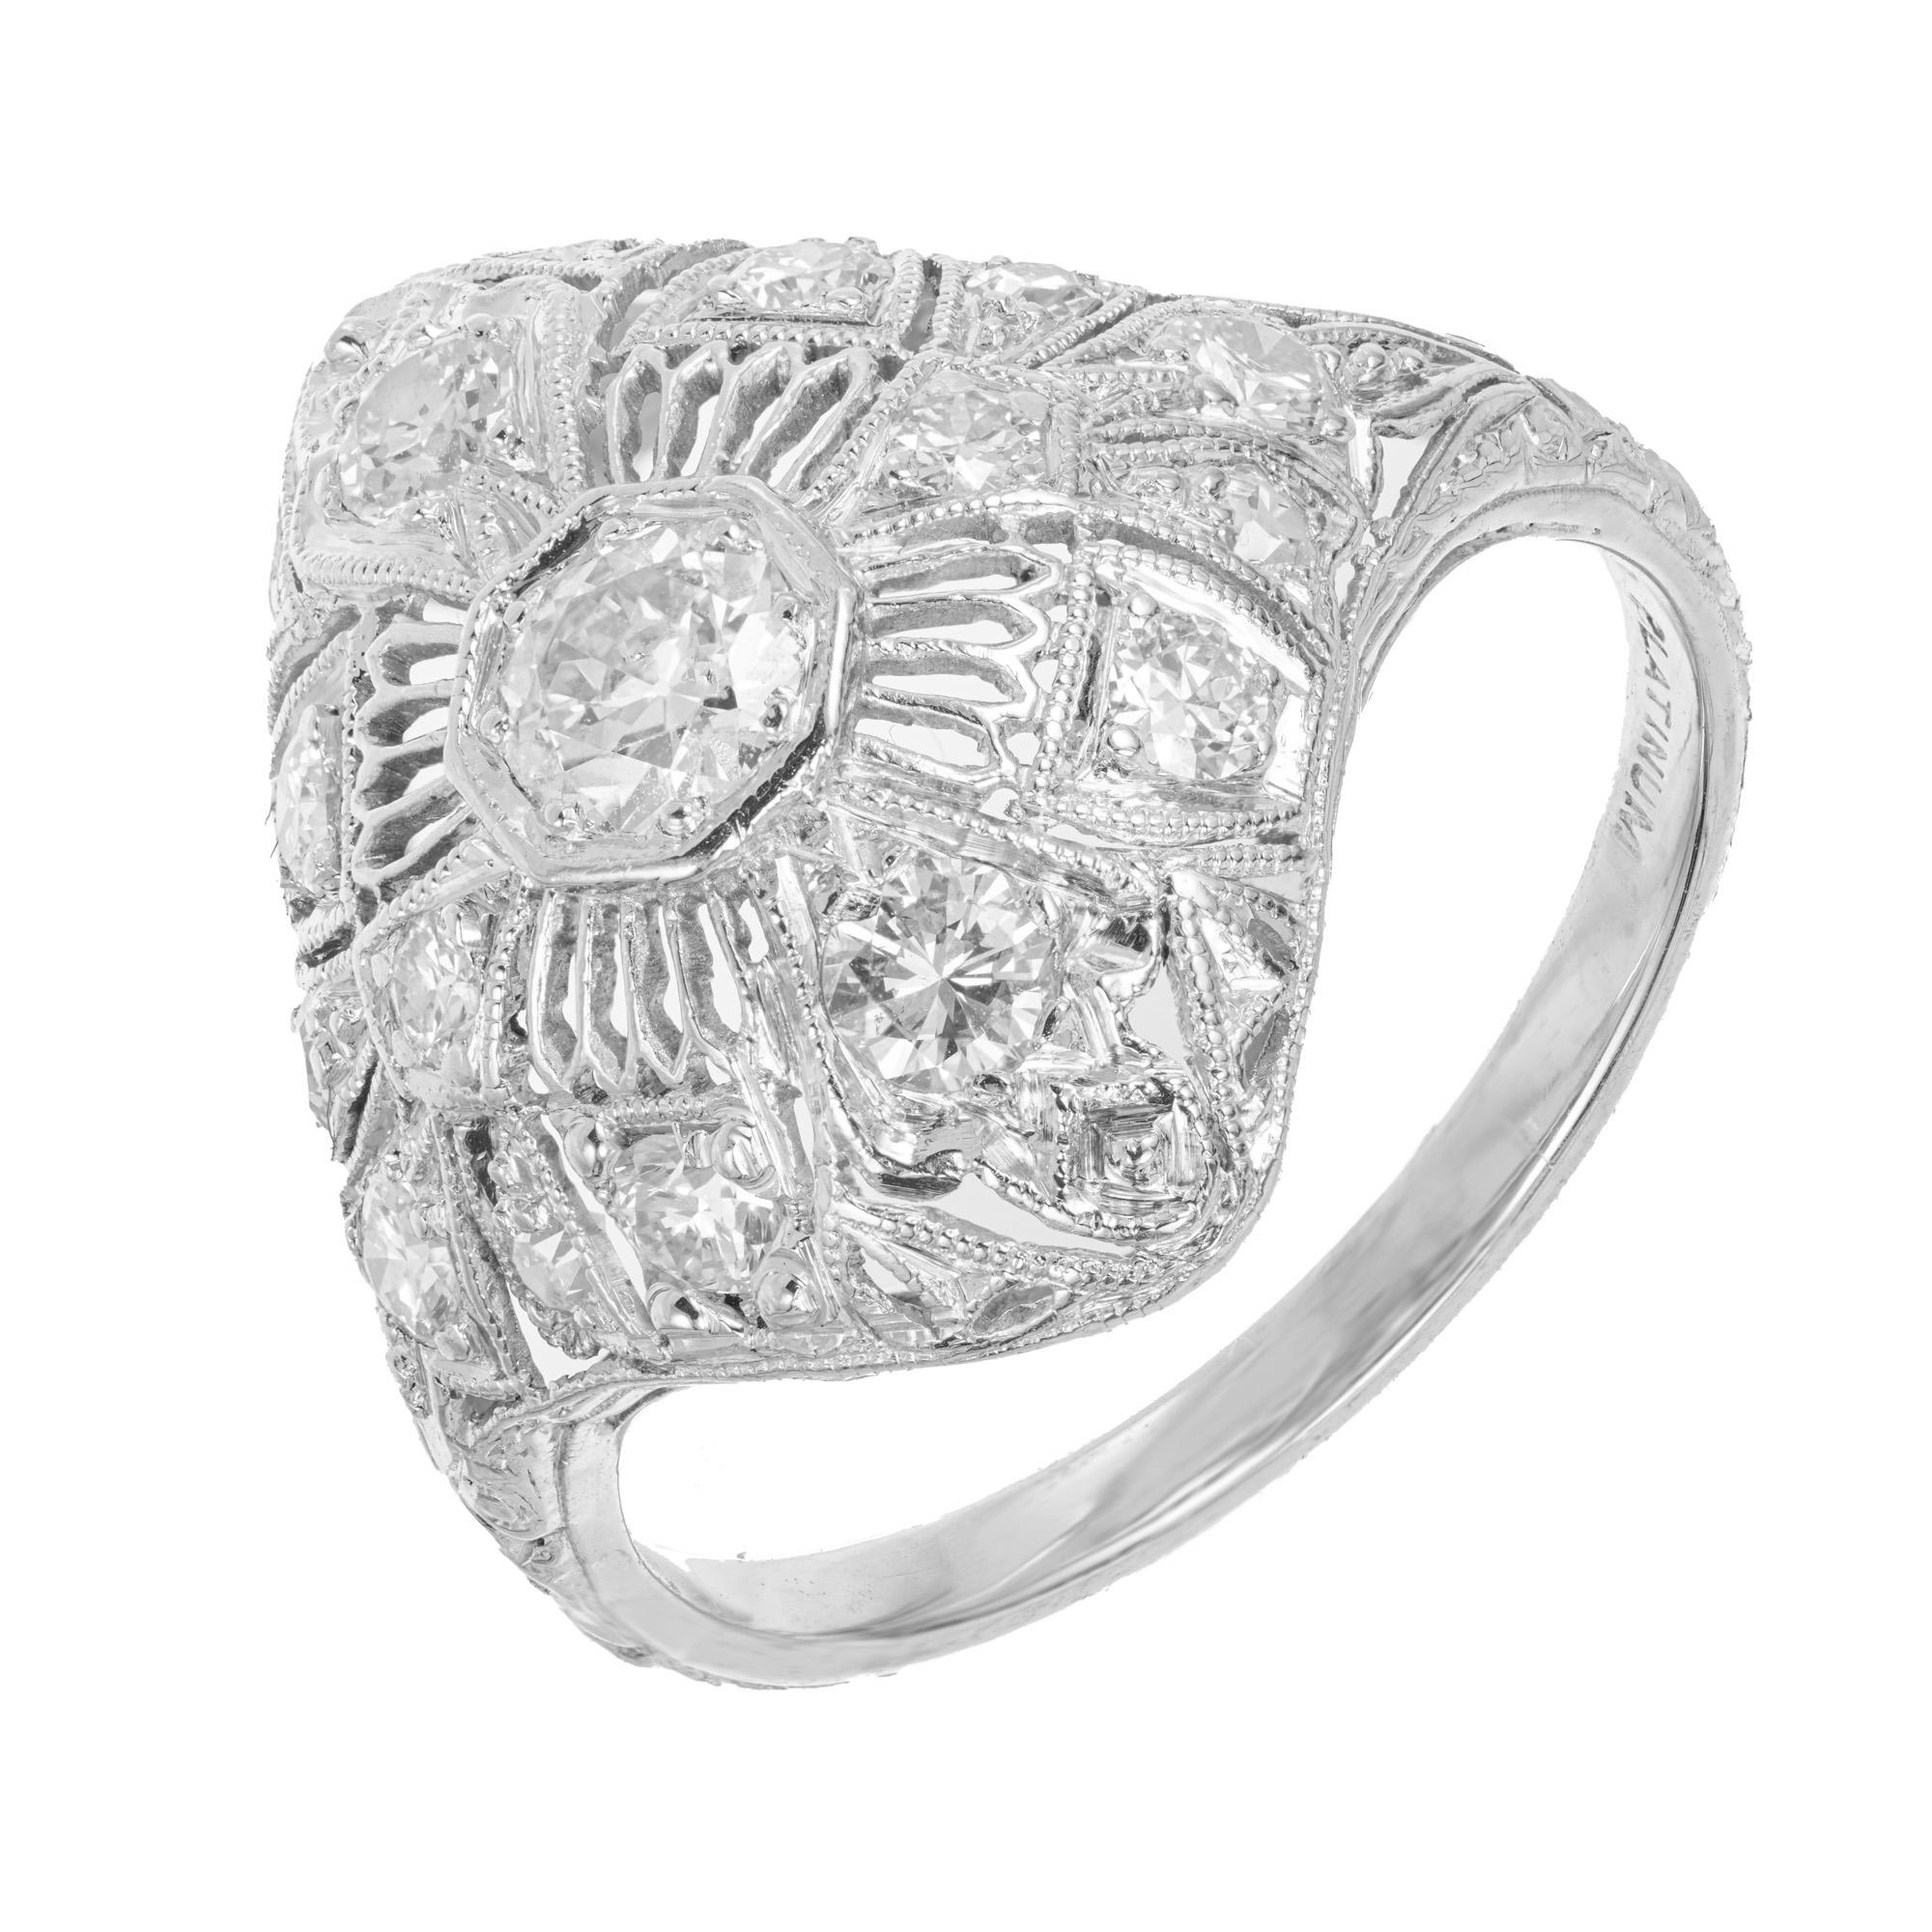 Original early 1900's platinum filagree diamond dome ring. 15 round H color (near colorless) diamonds approximately totaling .60cts set in a beautiful dome platinum filigree dome top setting. 

15 round diamonds, H VS SI approx. .60cts
Size 6 and